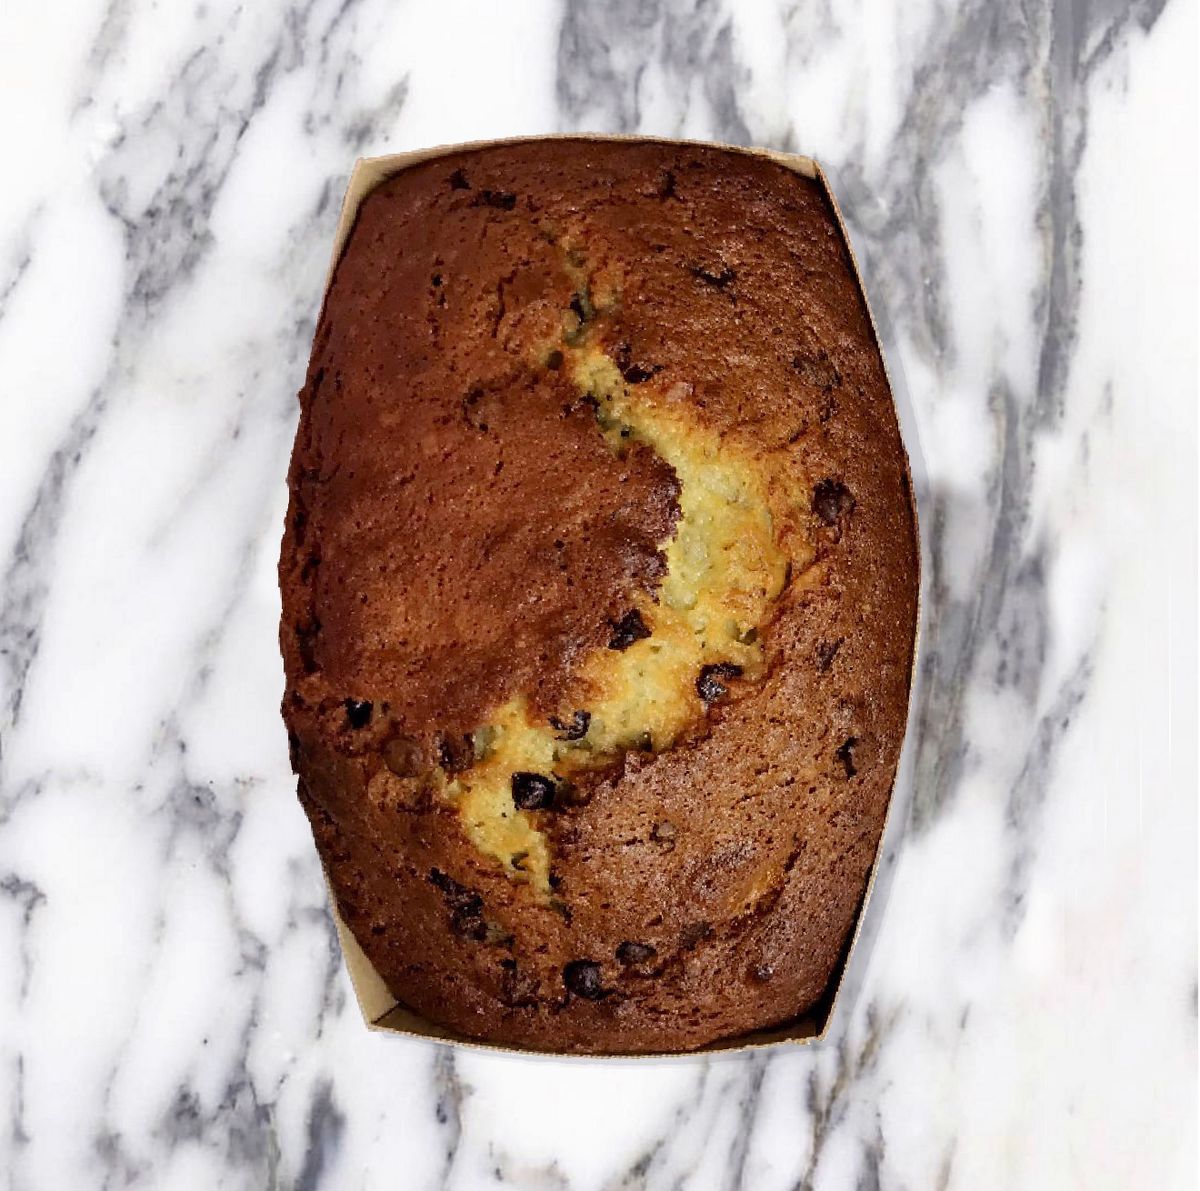 Banana bread with chocolate chips on marble countertop